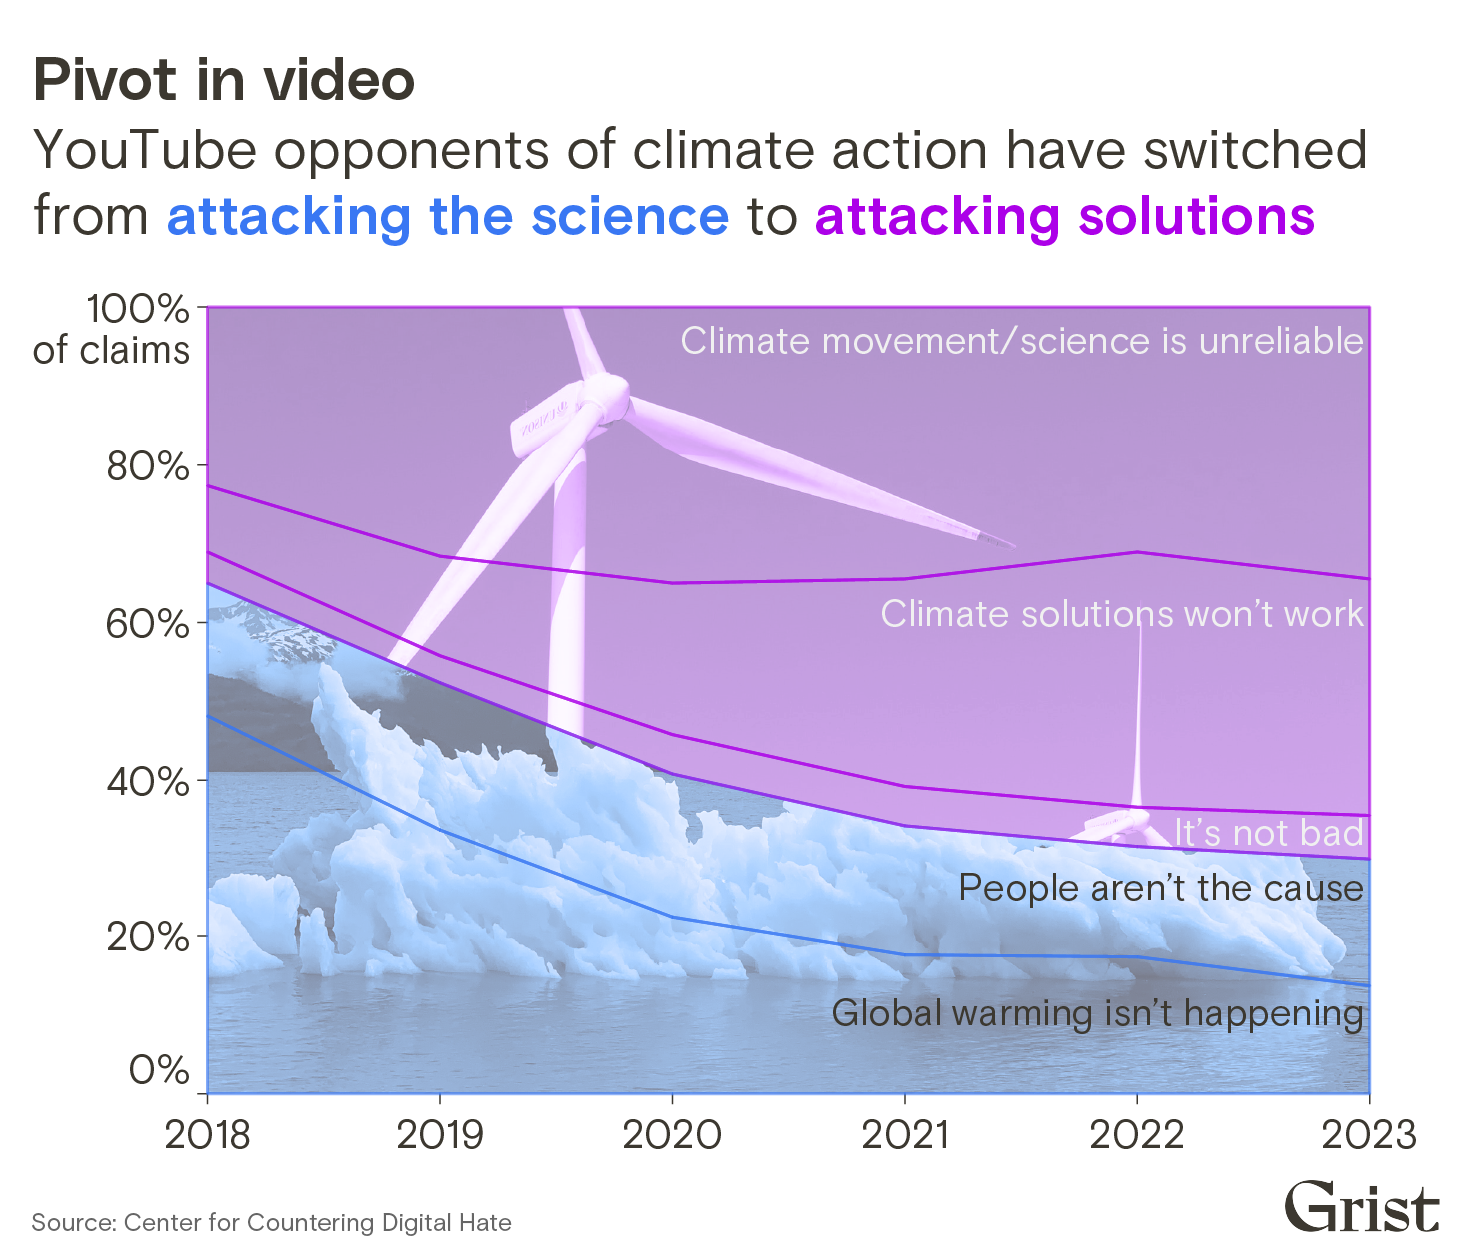 An area chart showing the percentage of denialist claims about climate change made by YouTubers between 2018 and 2023. Opponents of climate action have switched from attacking the science to attacking solutions.